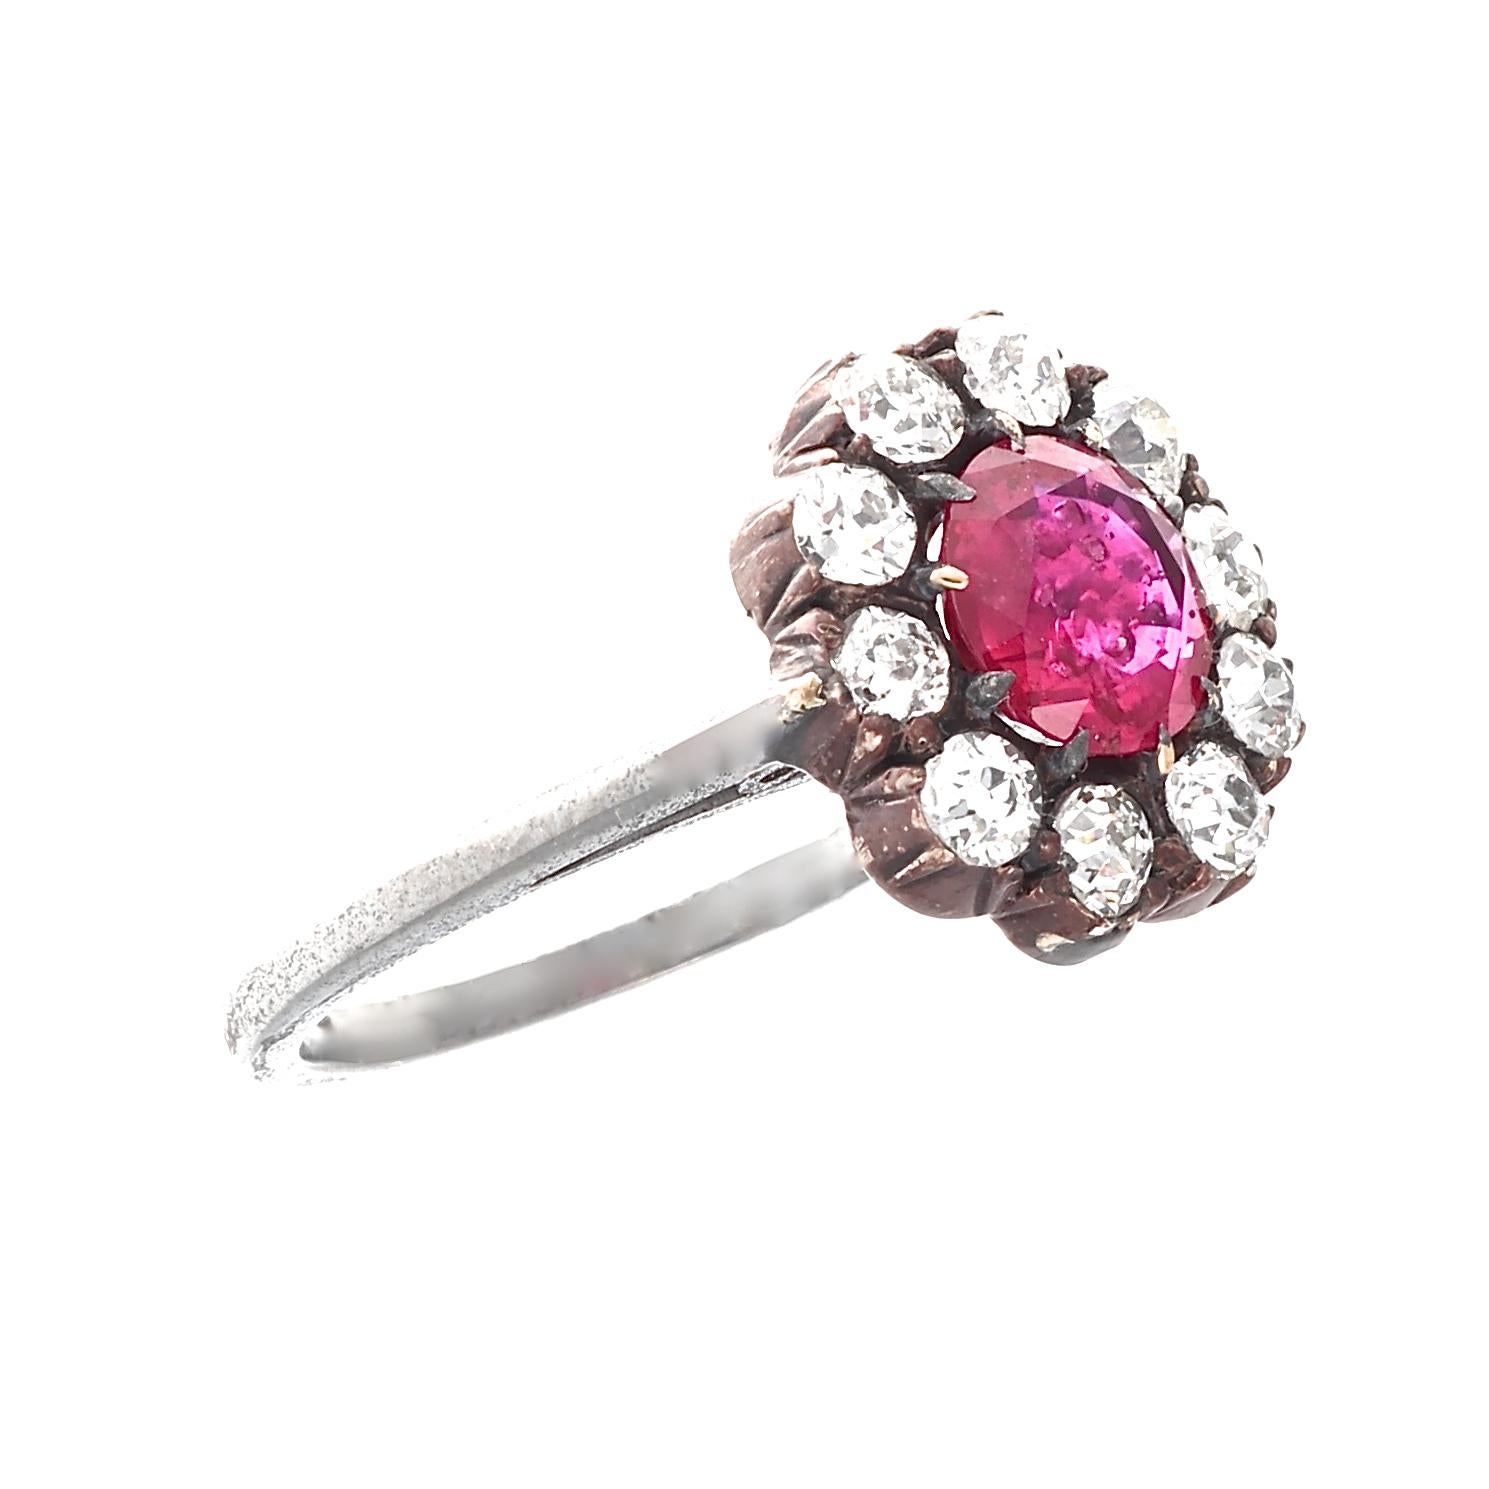 Designed after a blossoming flower the halo ring is the most popular modern design for engagement rings and has been a staple for centuries. Featuring a 1.31 carat vivid red ruby that is AGL certified as Burma origin with no indications of heat